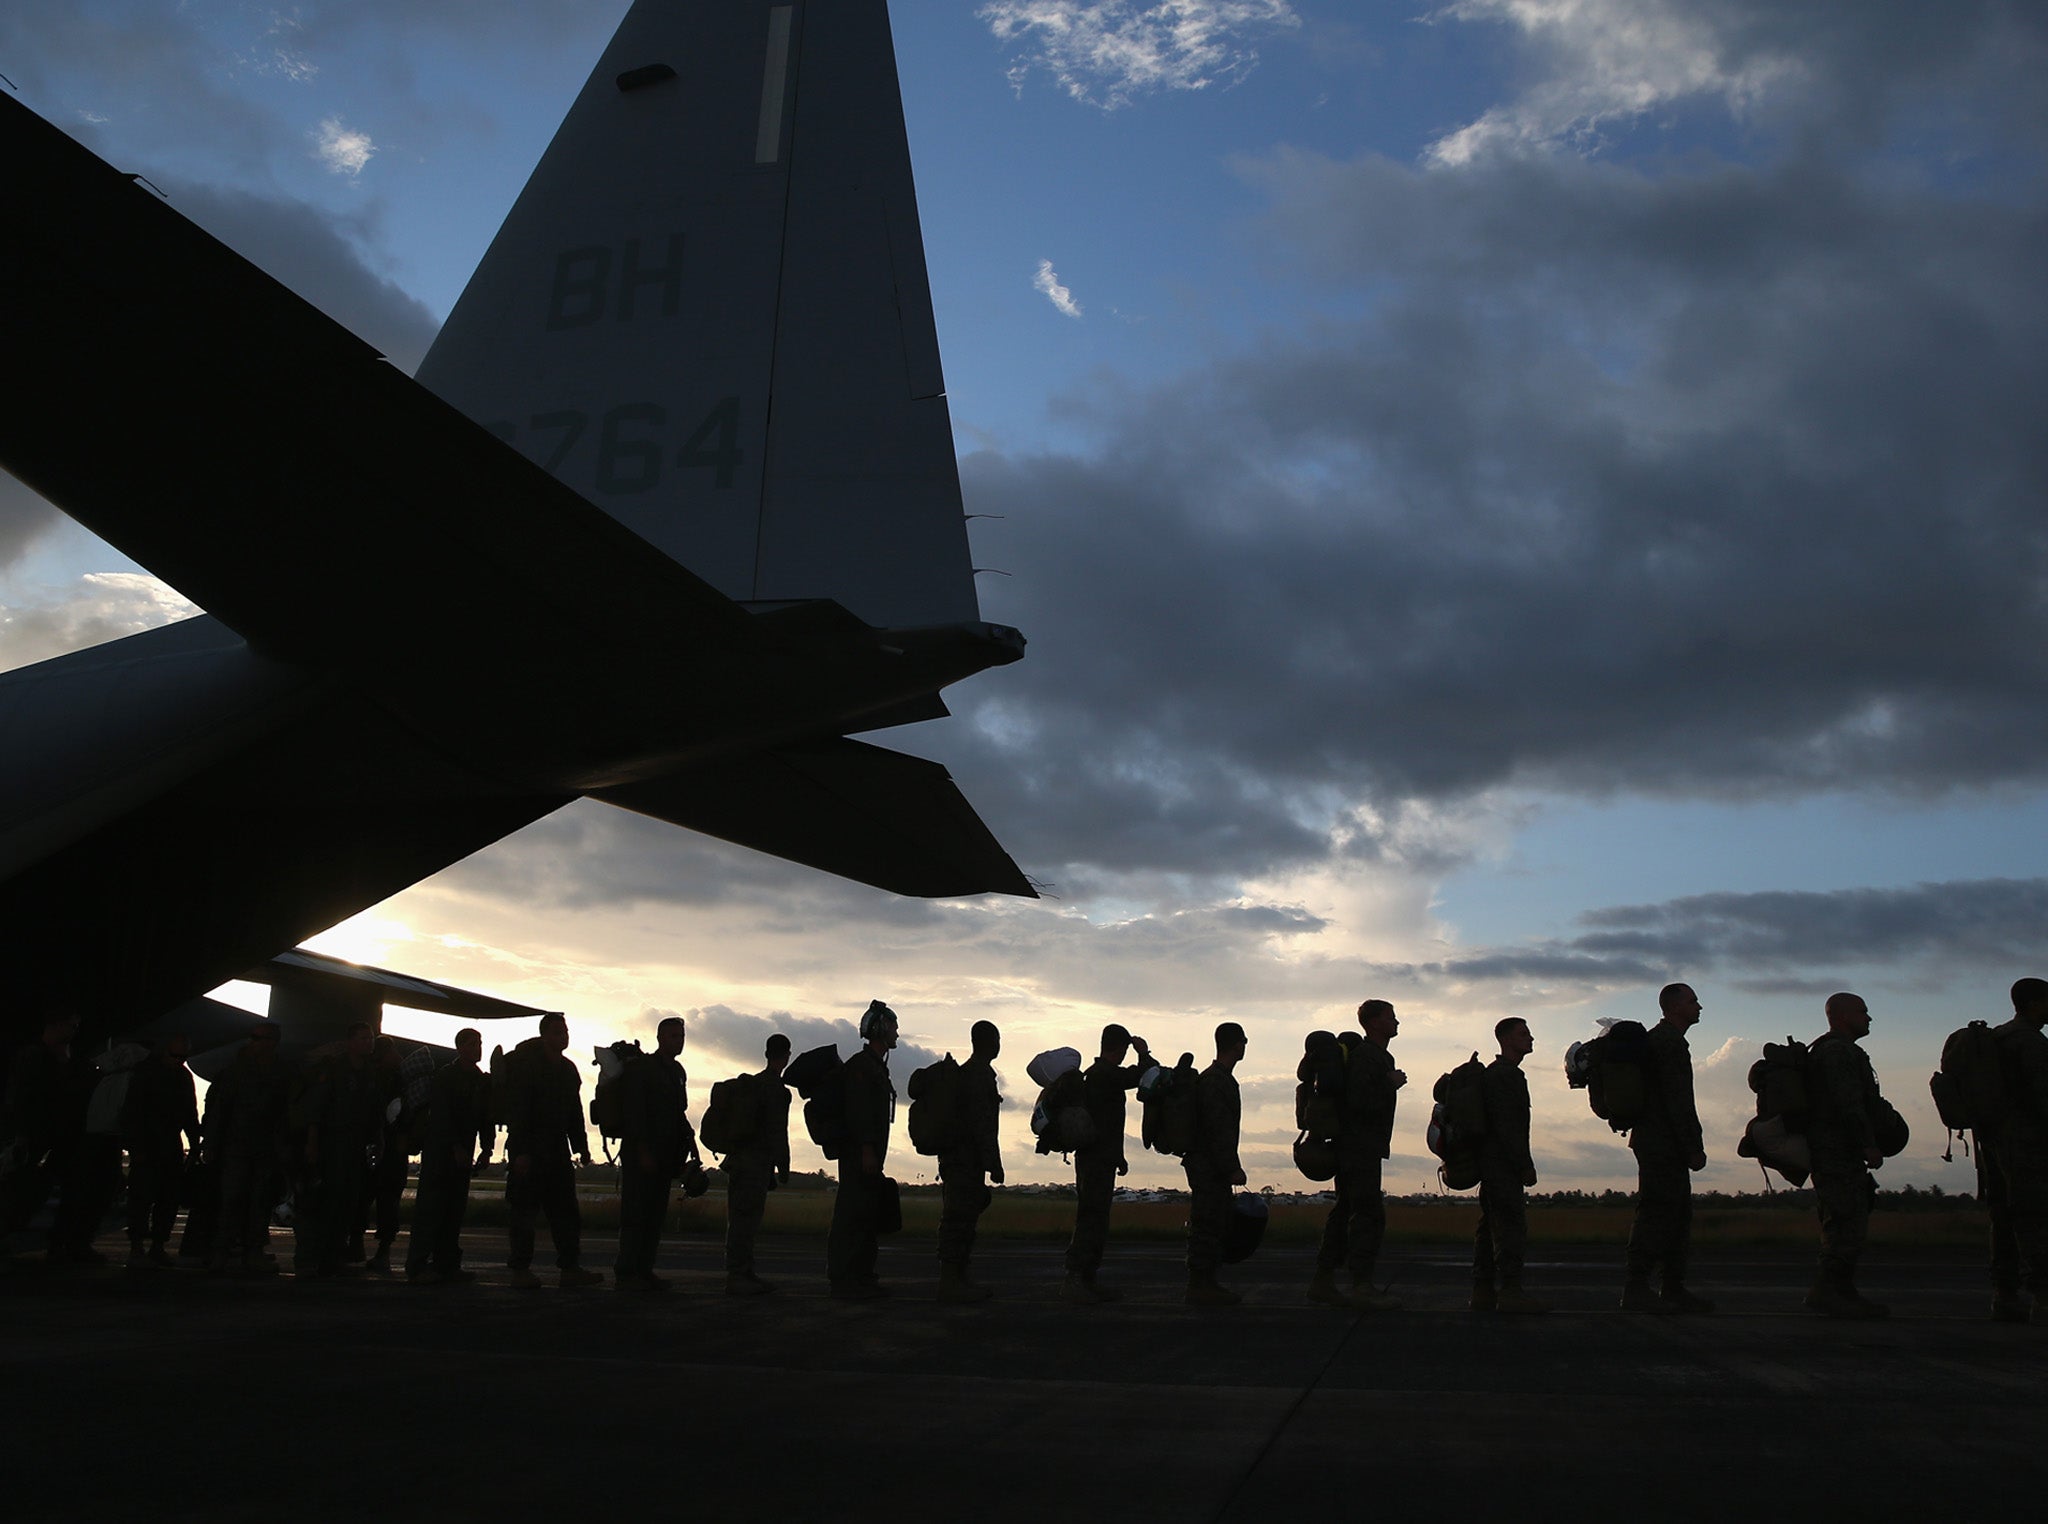 The 330 Marines will be stationed at Værnes Air base in Norway